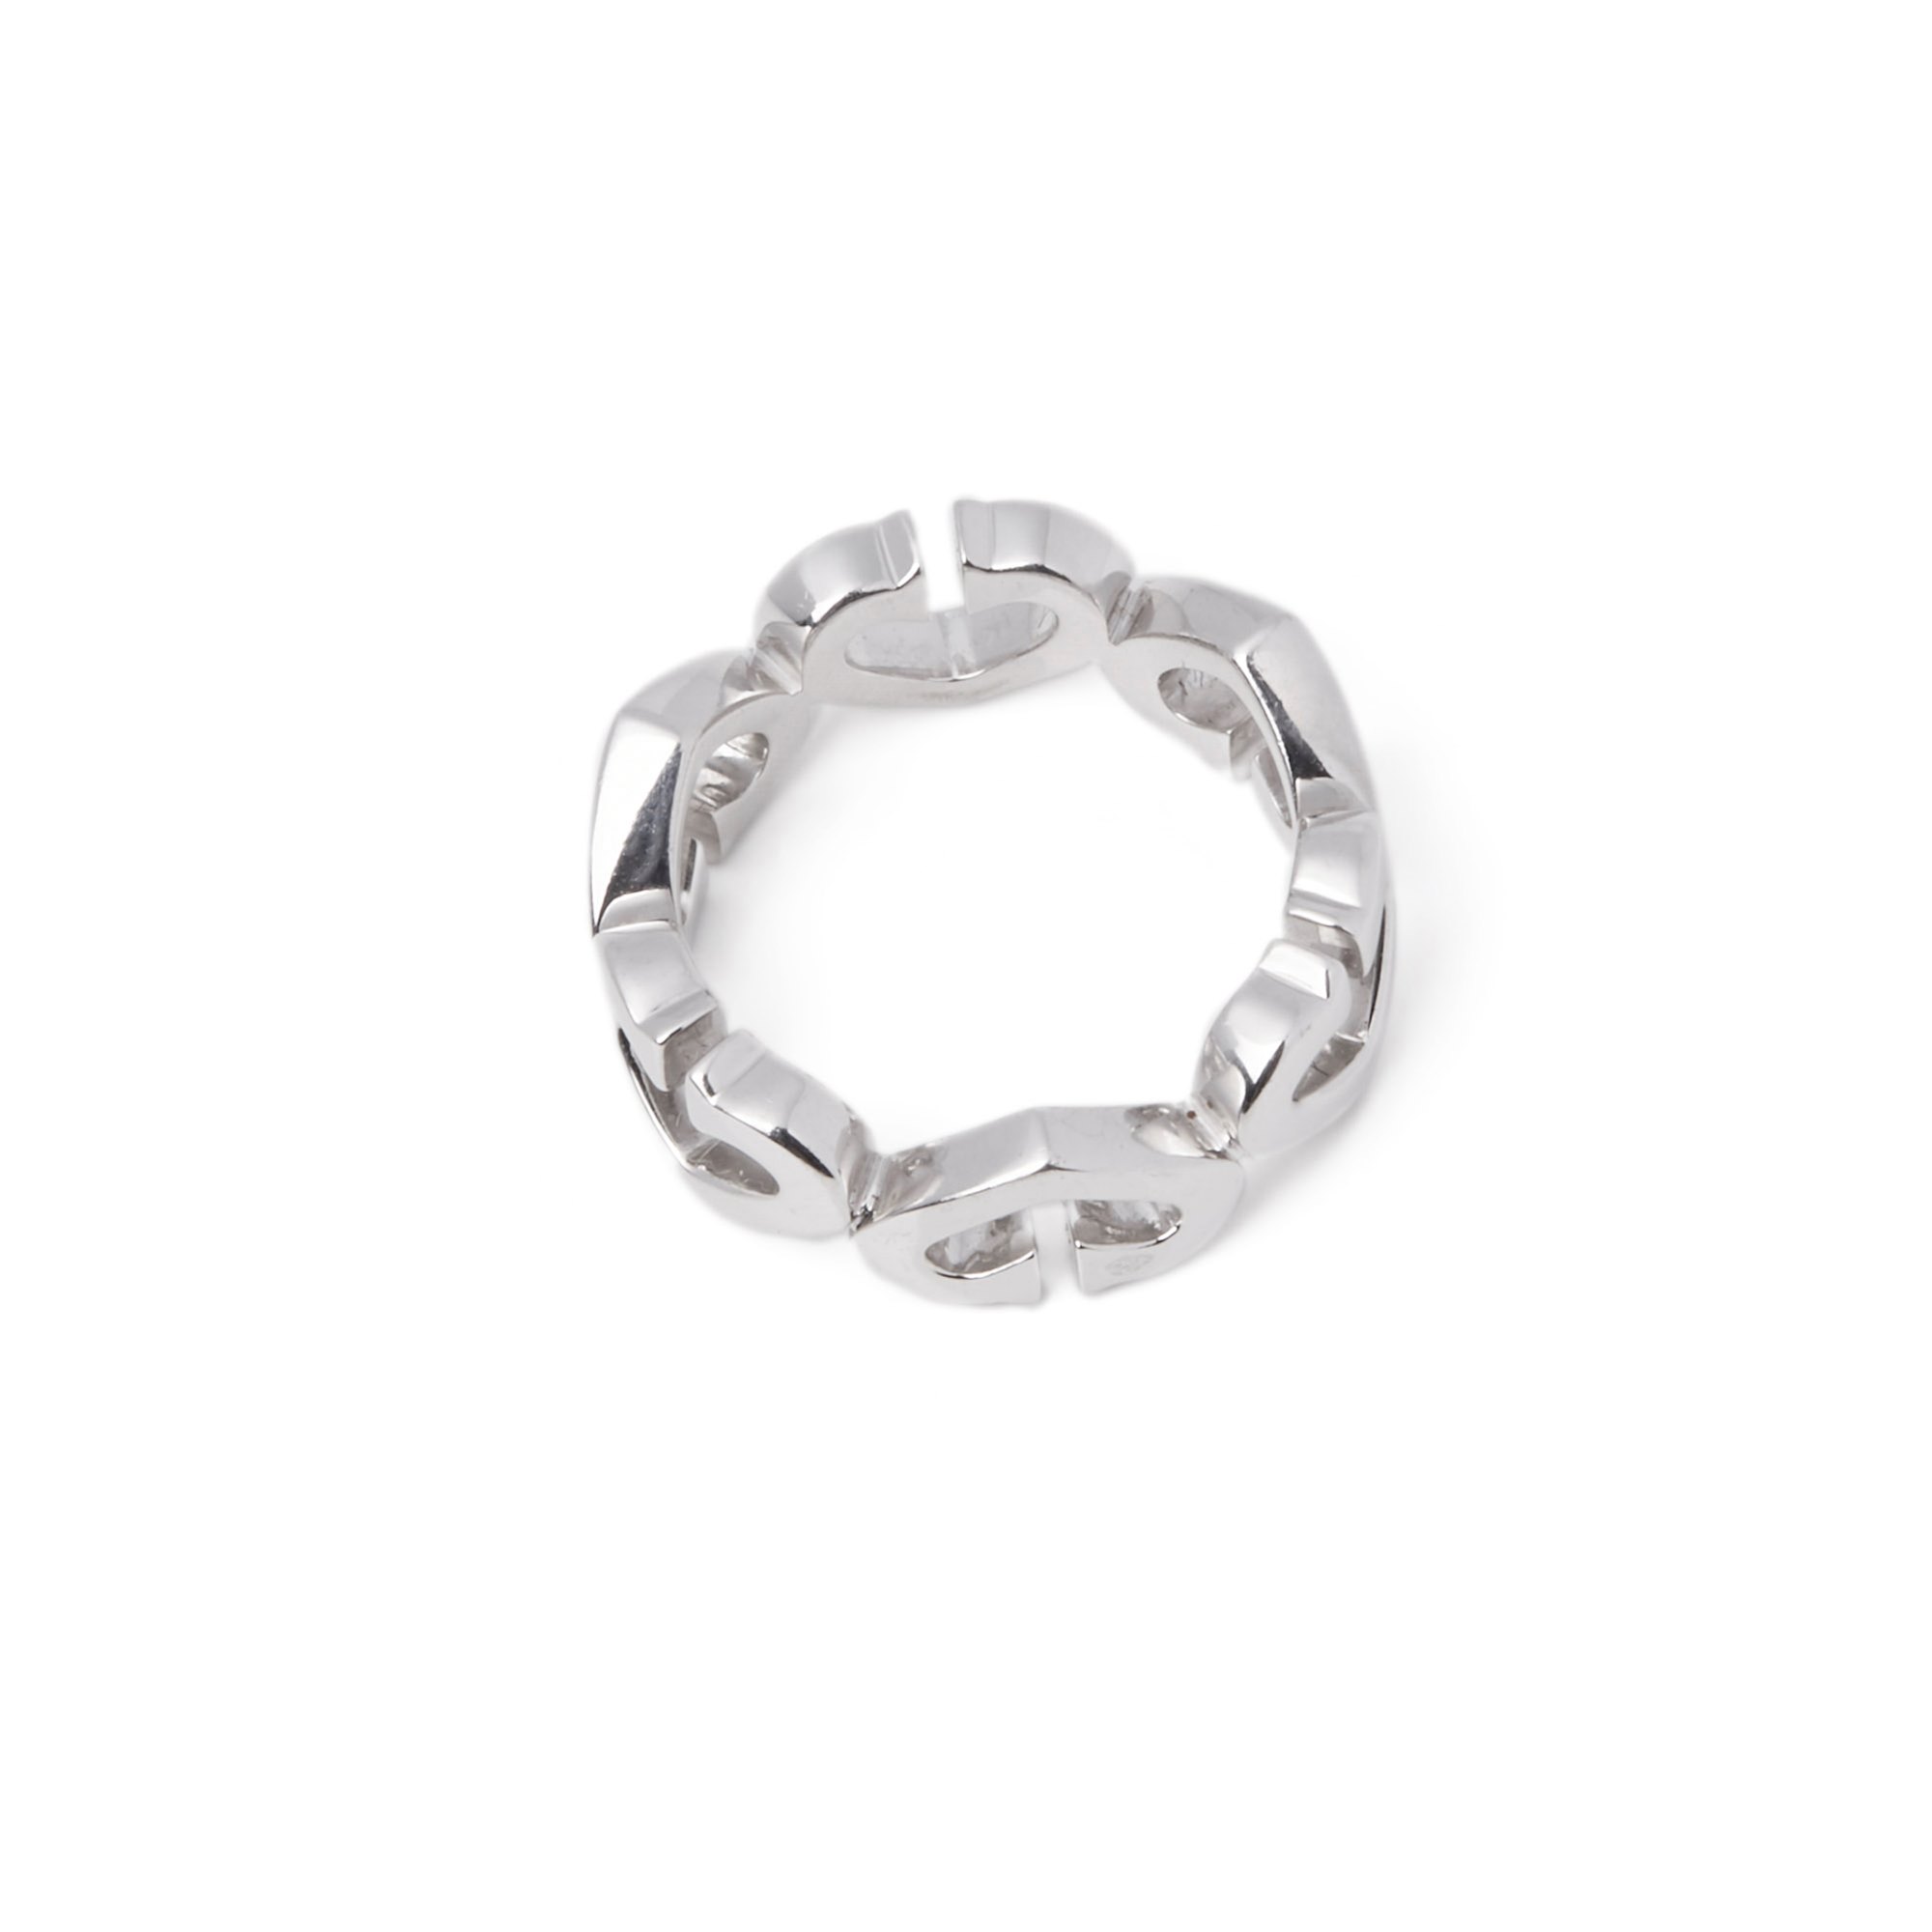 Cartier 18ct White Gold Hearts and Symbols Ring